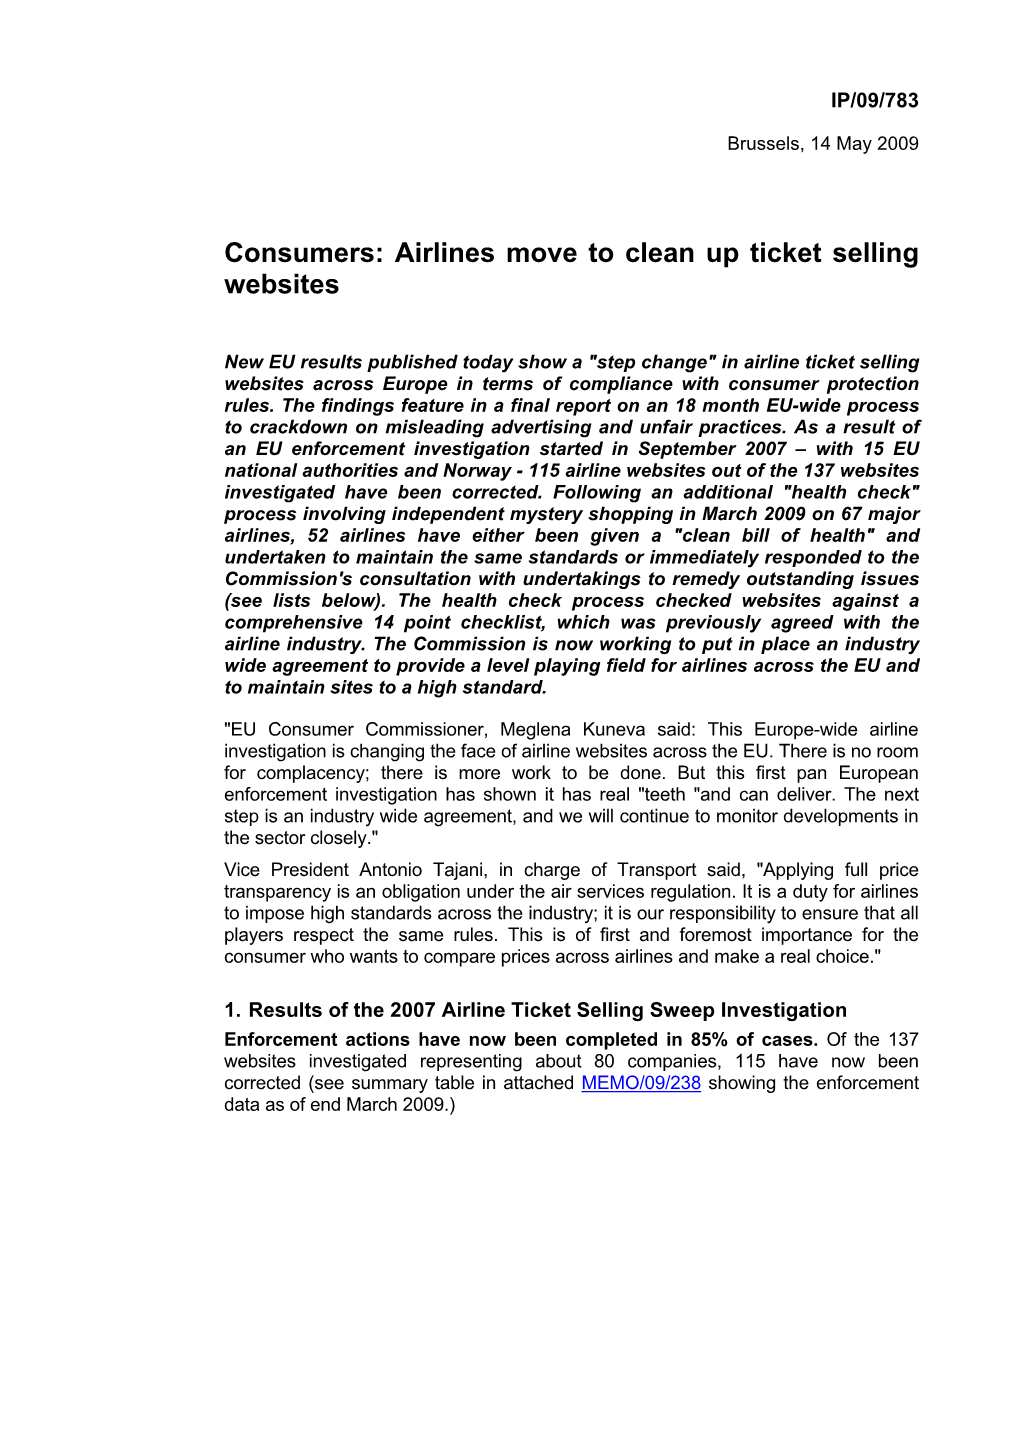 Airlines Move to Clean up Ticket Selling Websites